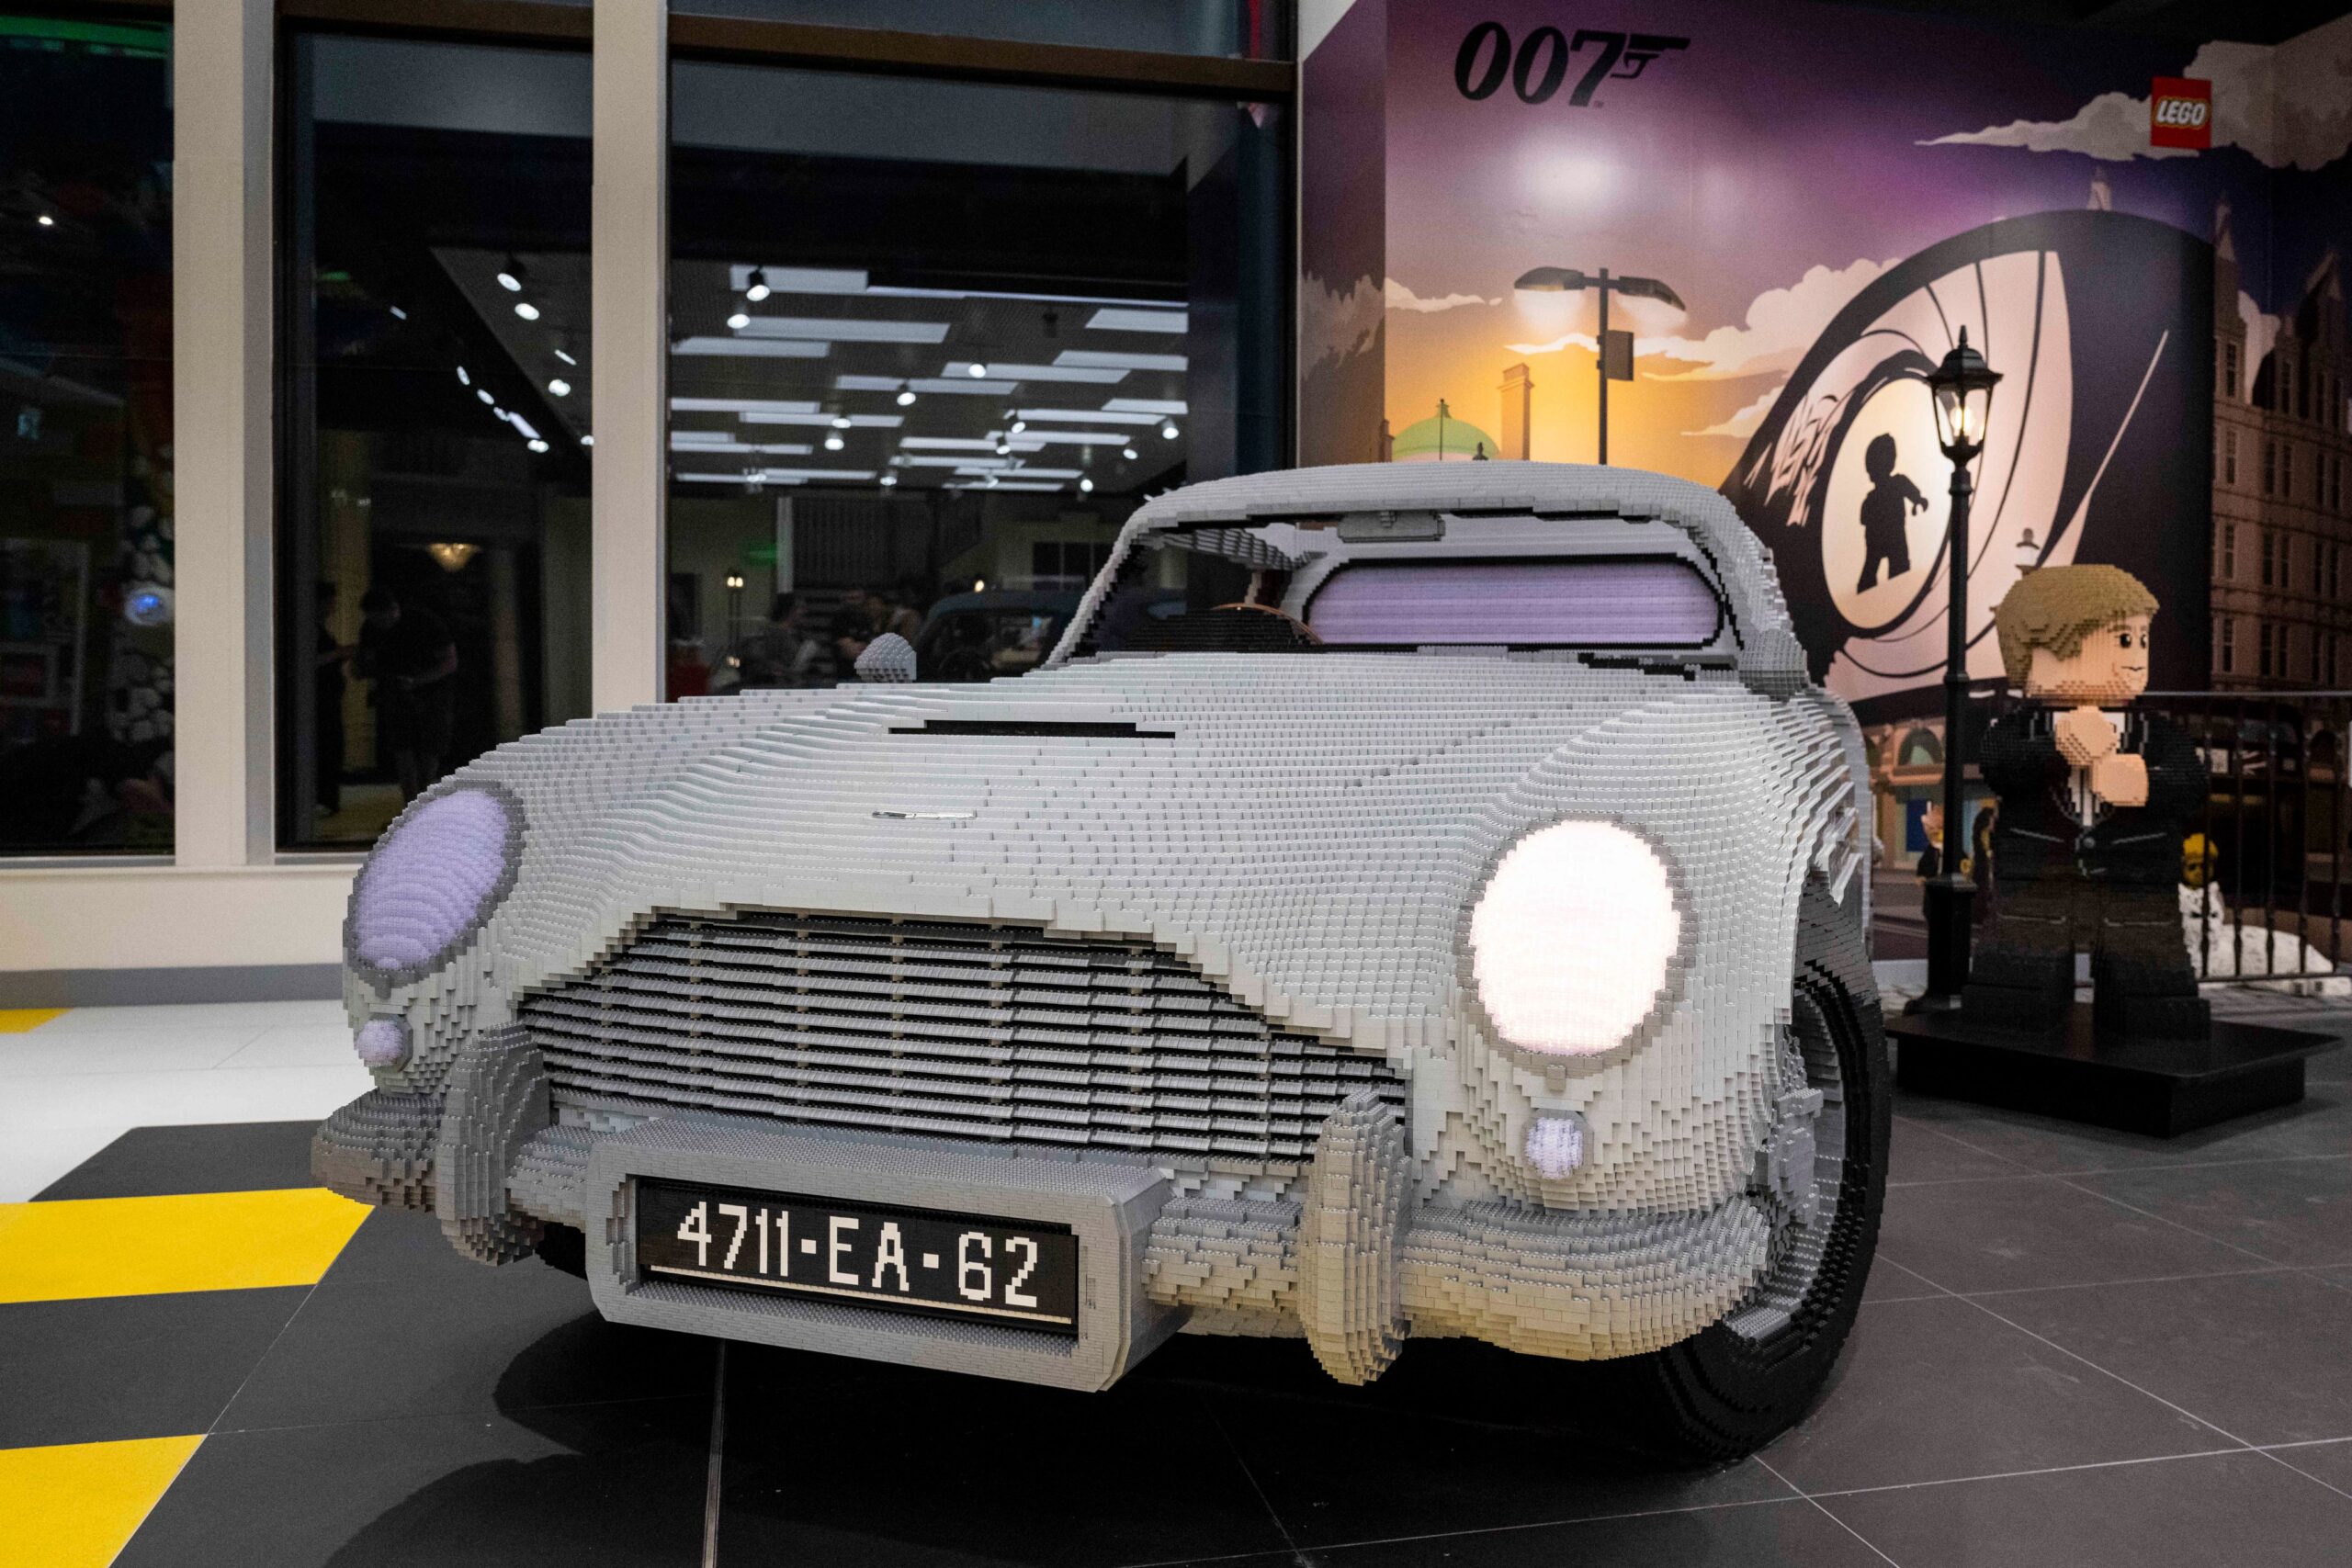 Now pay attention, 007 – you’ll need 360,000 bricks to build this life-size Lego DB5